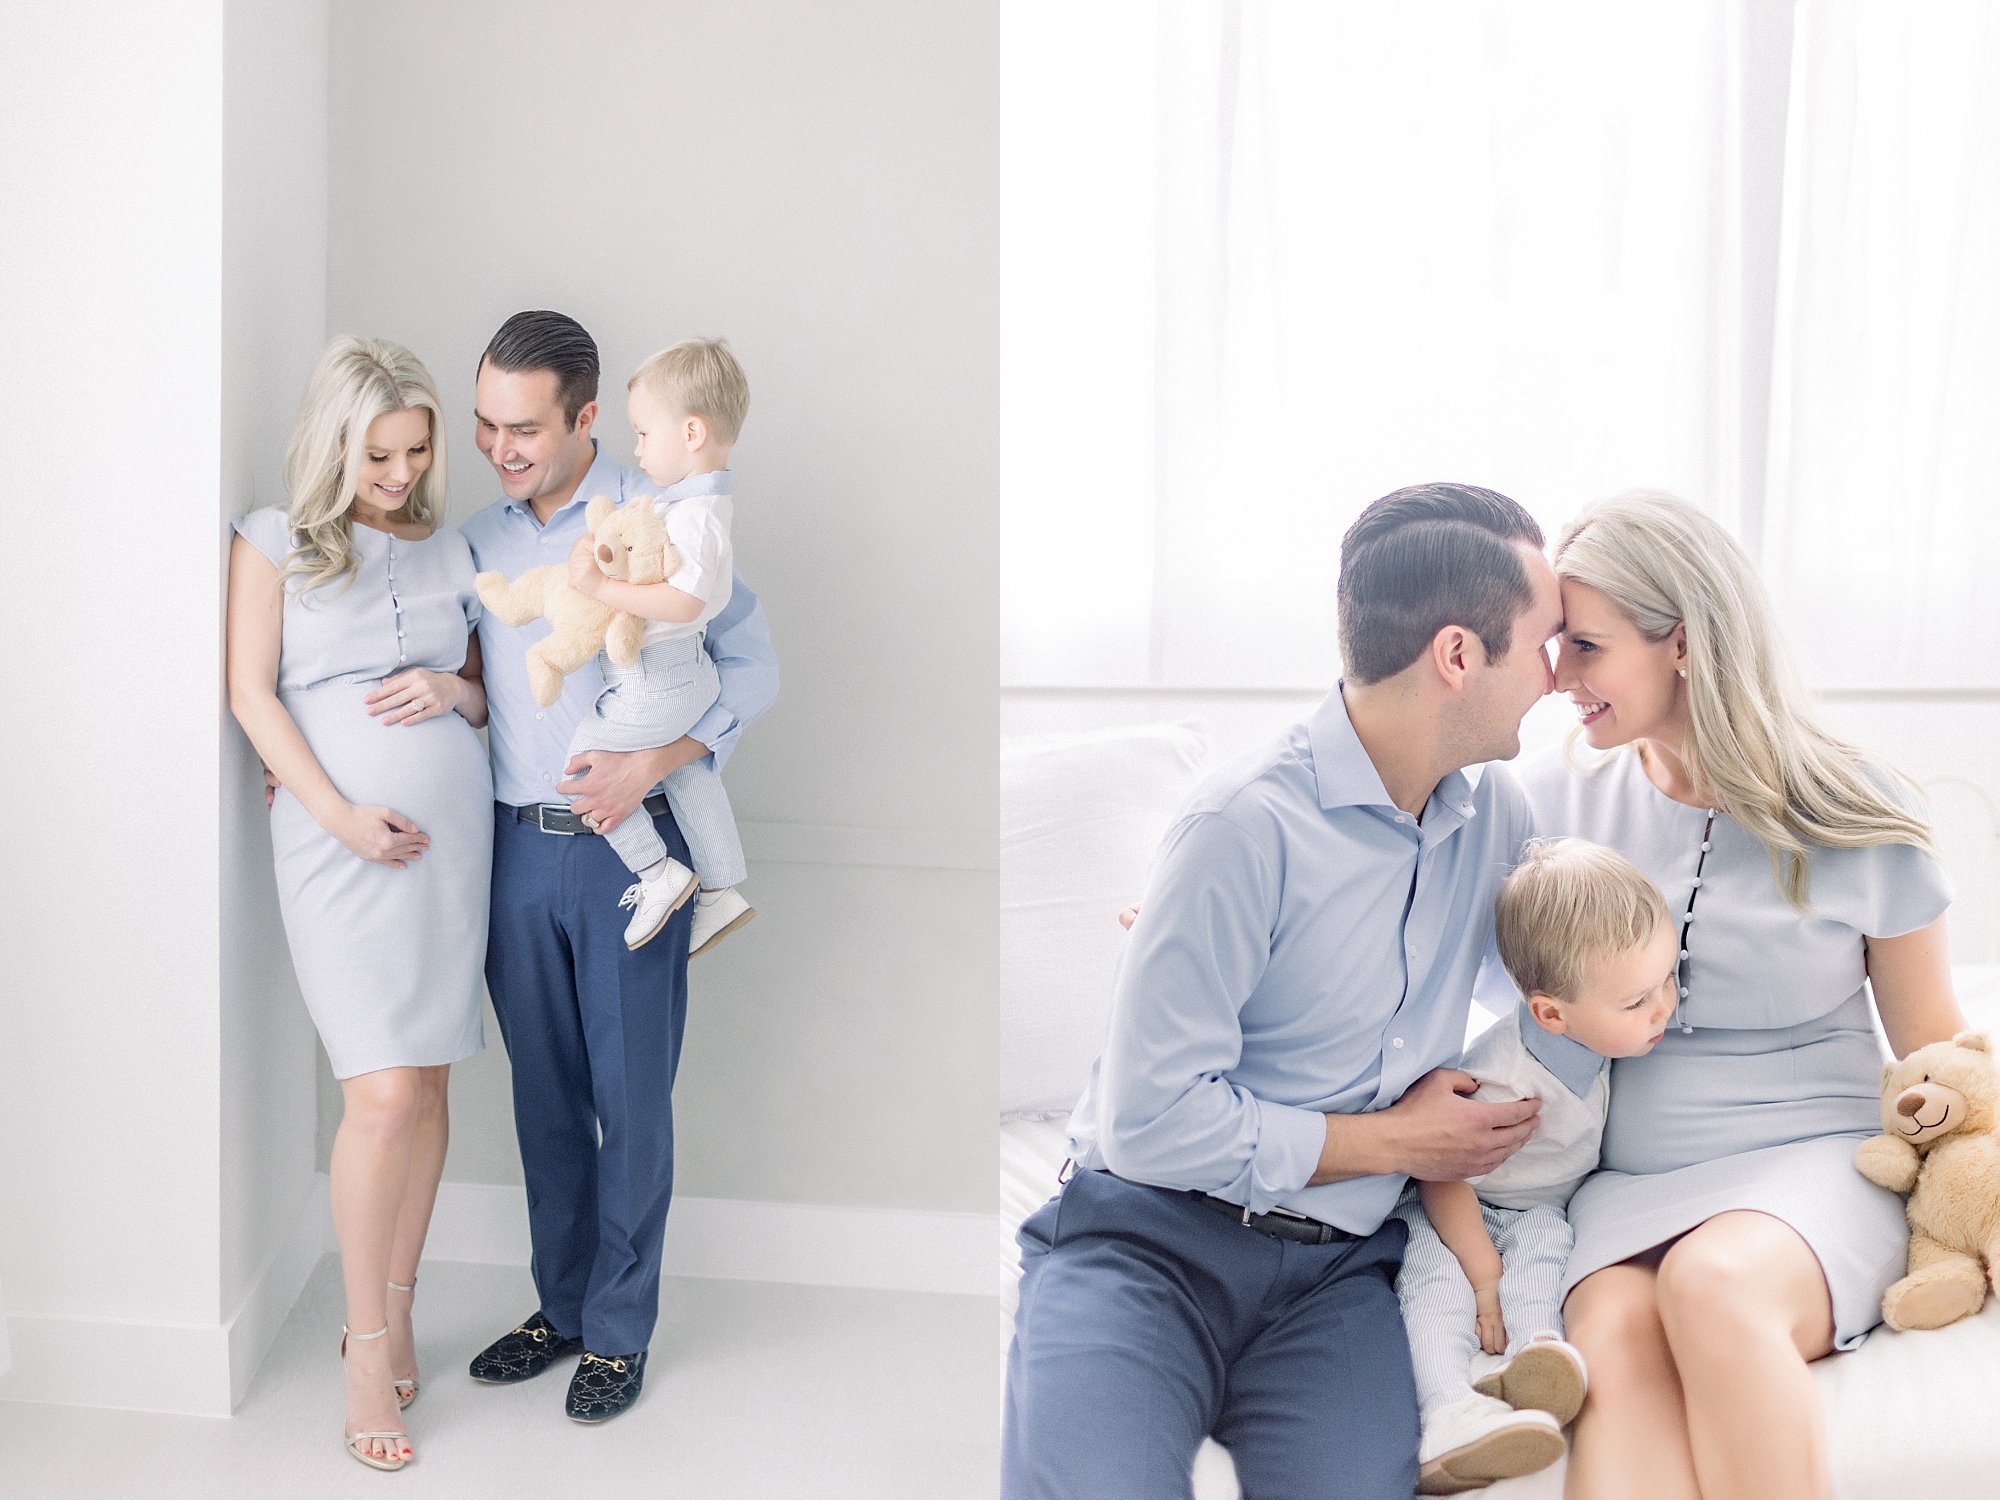 Dallas pregnancy announcement photo shoot in light and airy photography studio